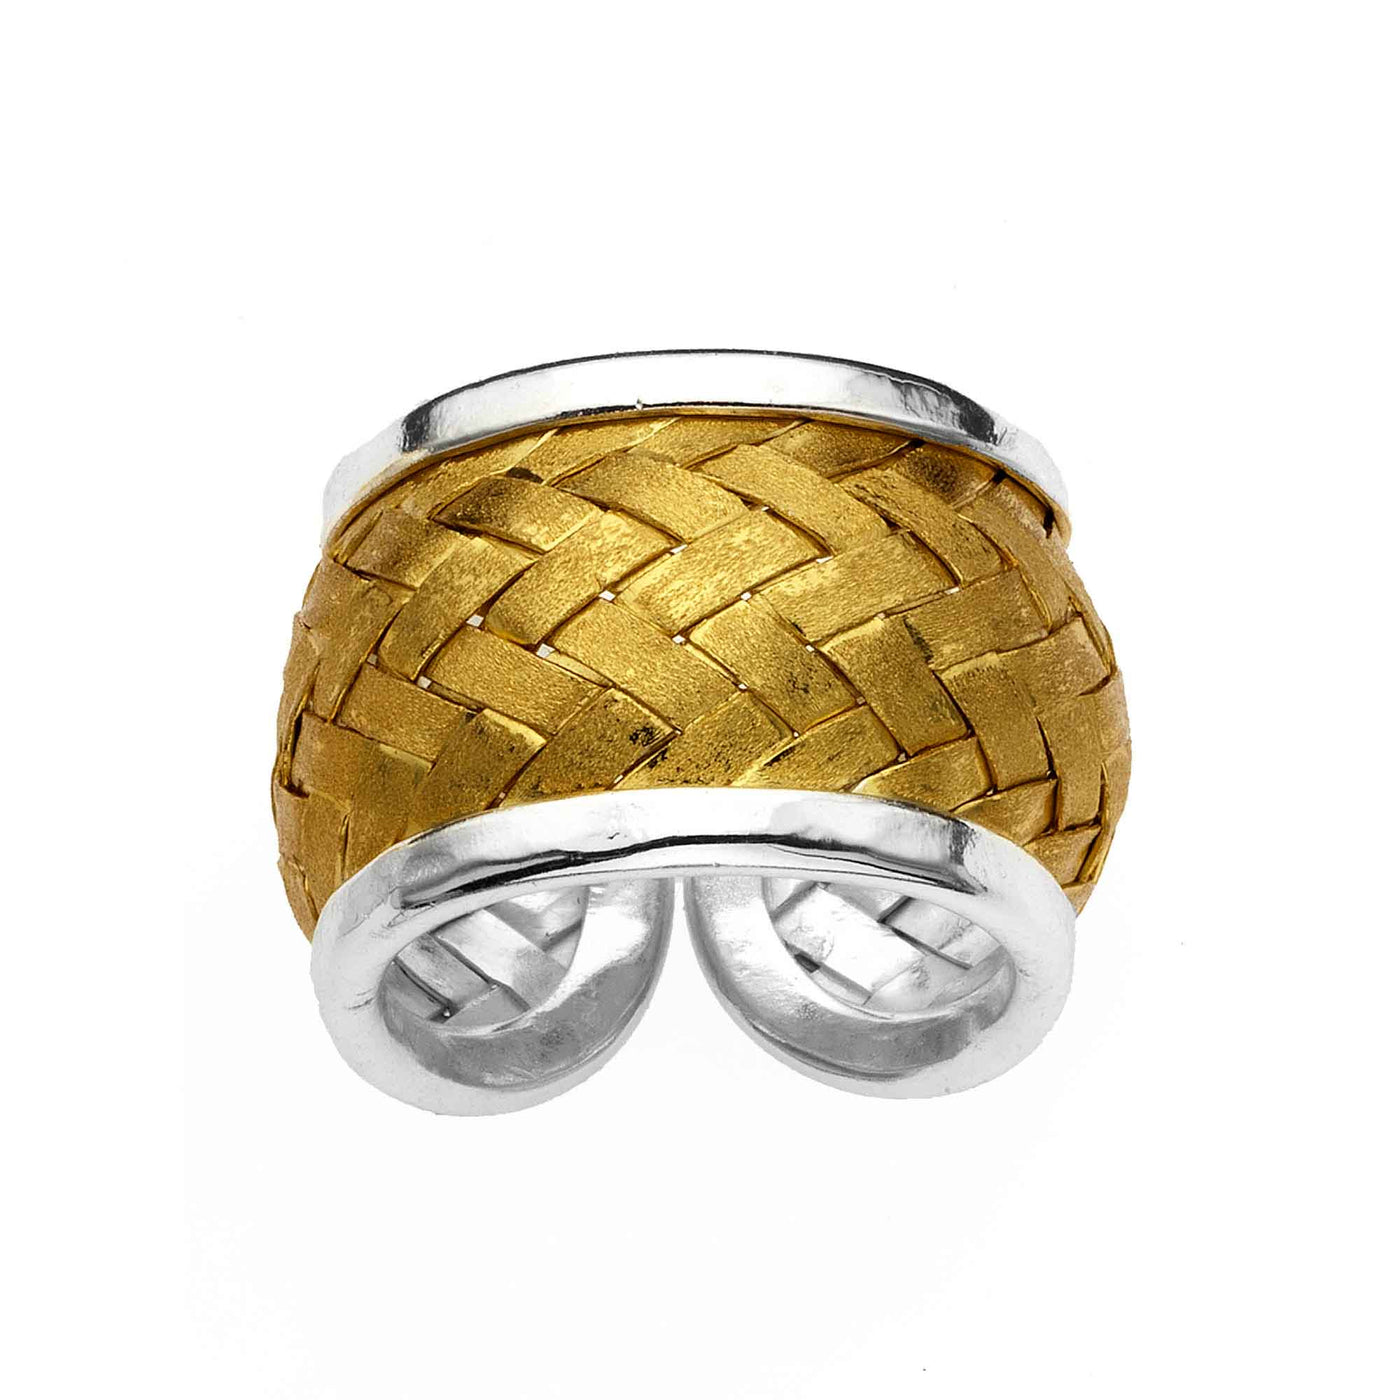 Rebecca Sloane Gold Plated Silver Woven Basketweave Ring